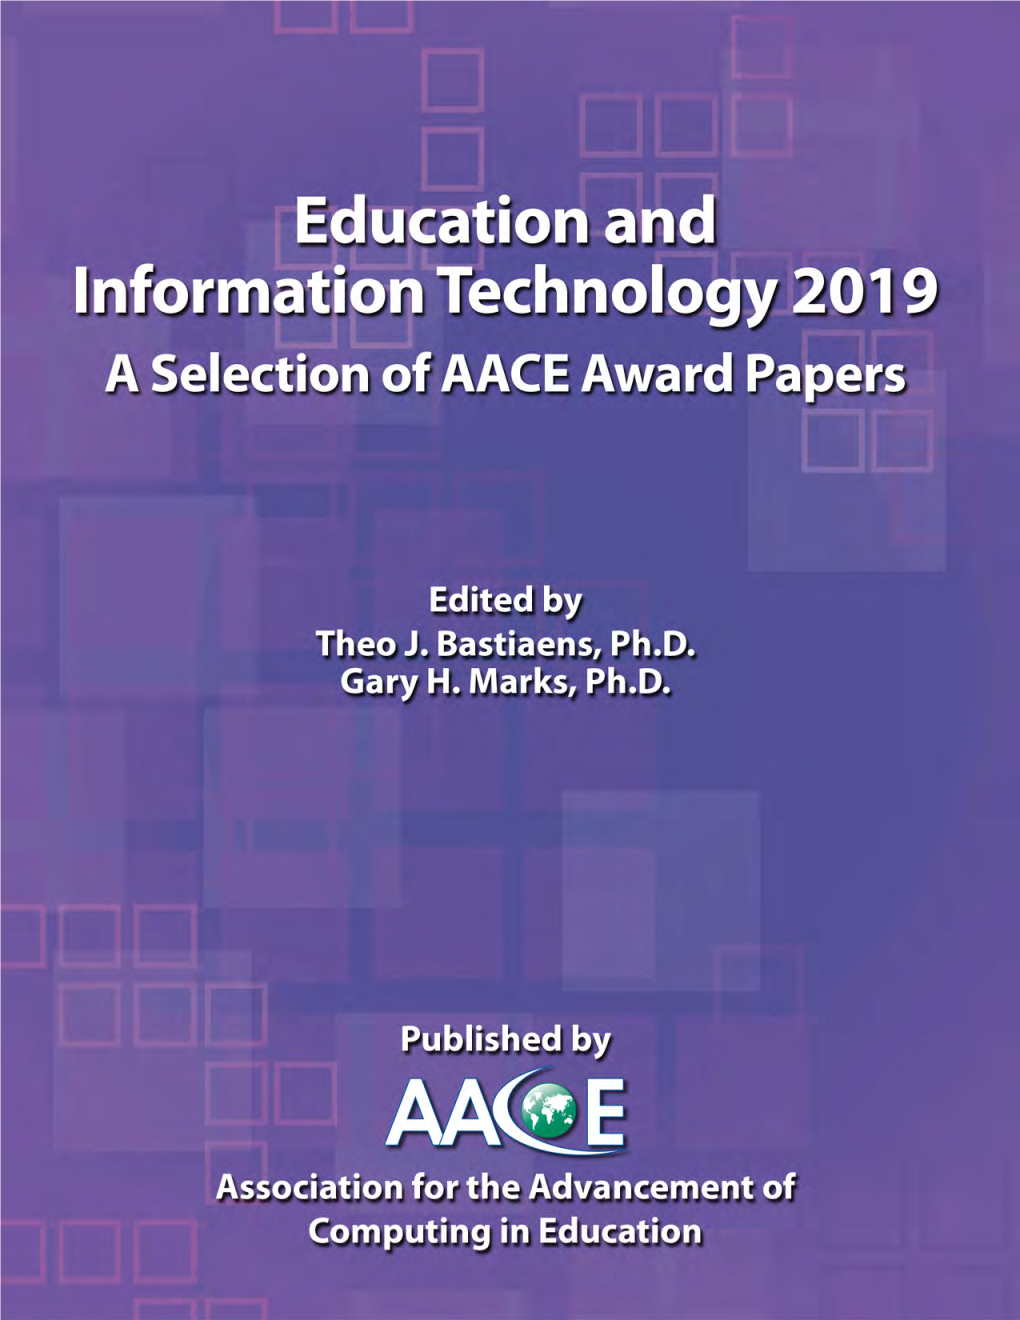 2019 a Selection of AACE Award Papers